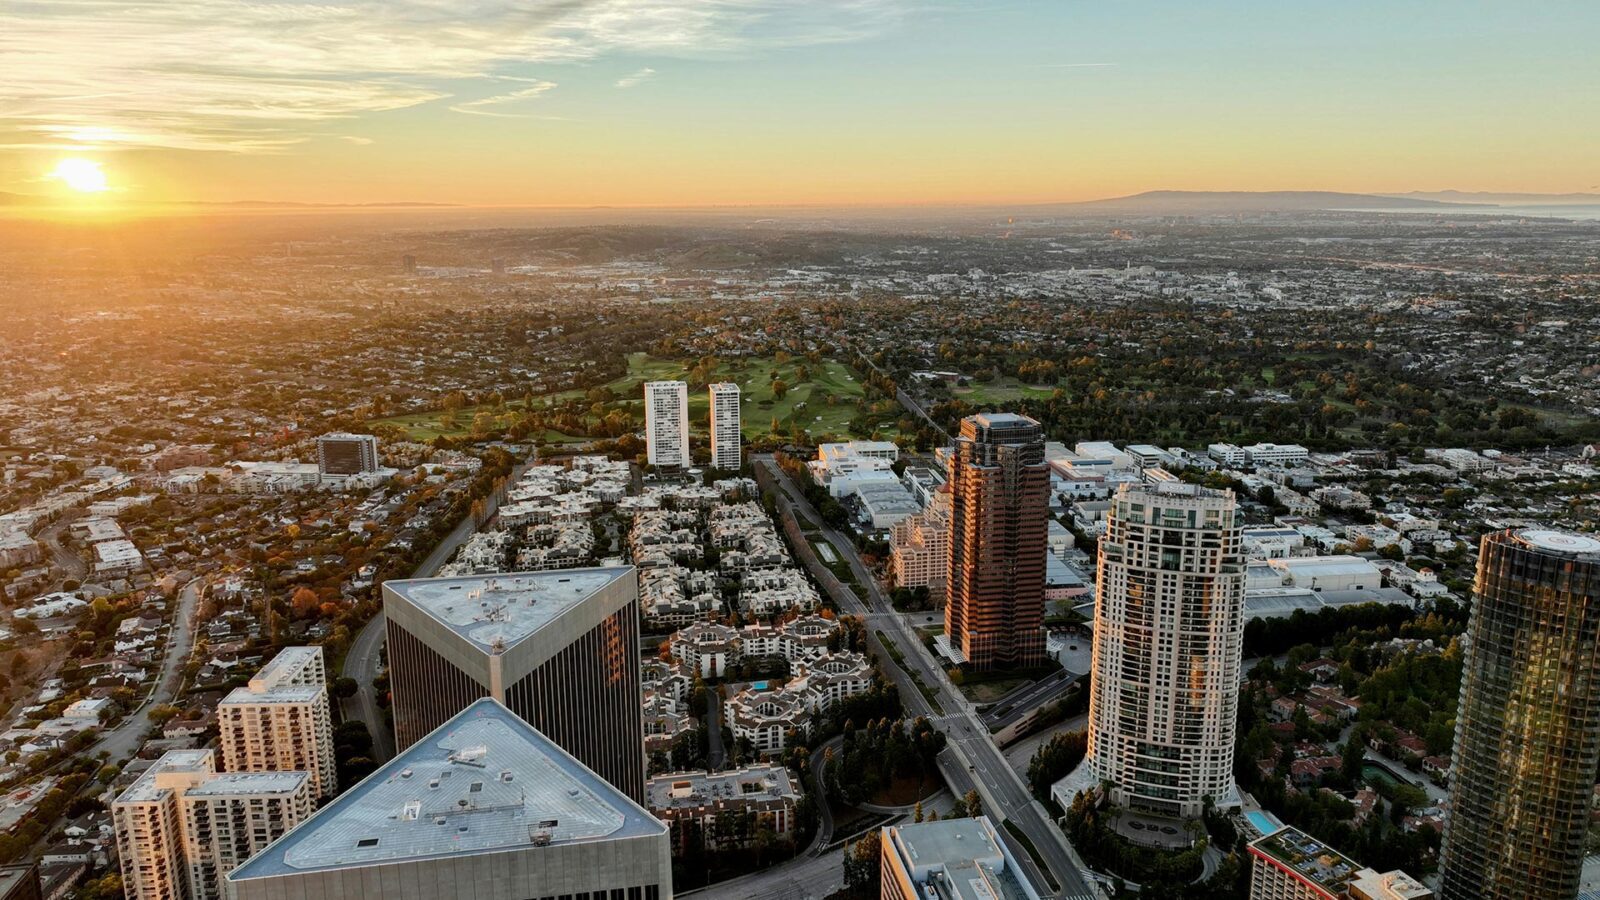 An aerial view of Century City, CA